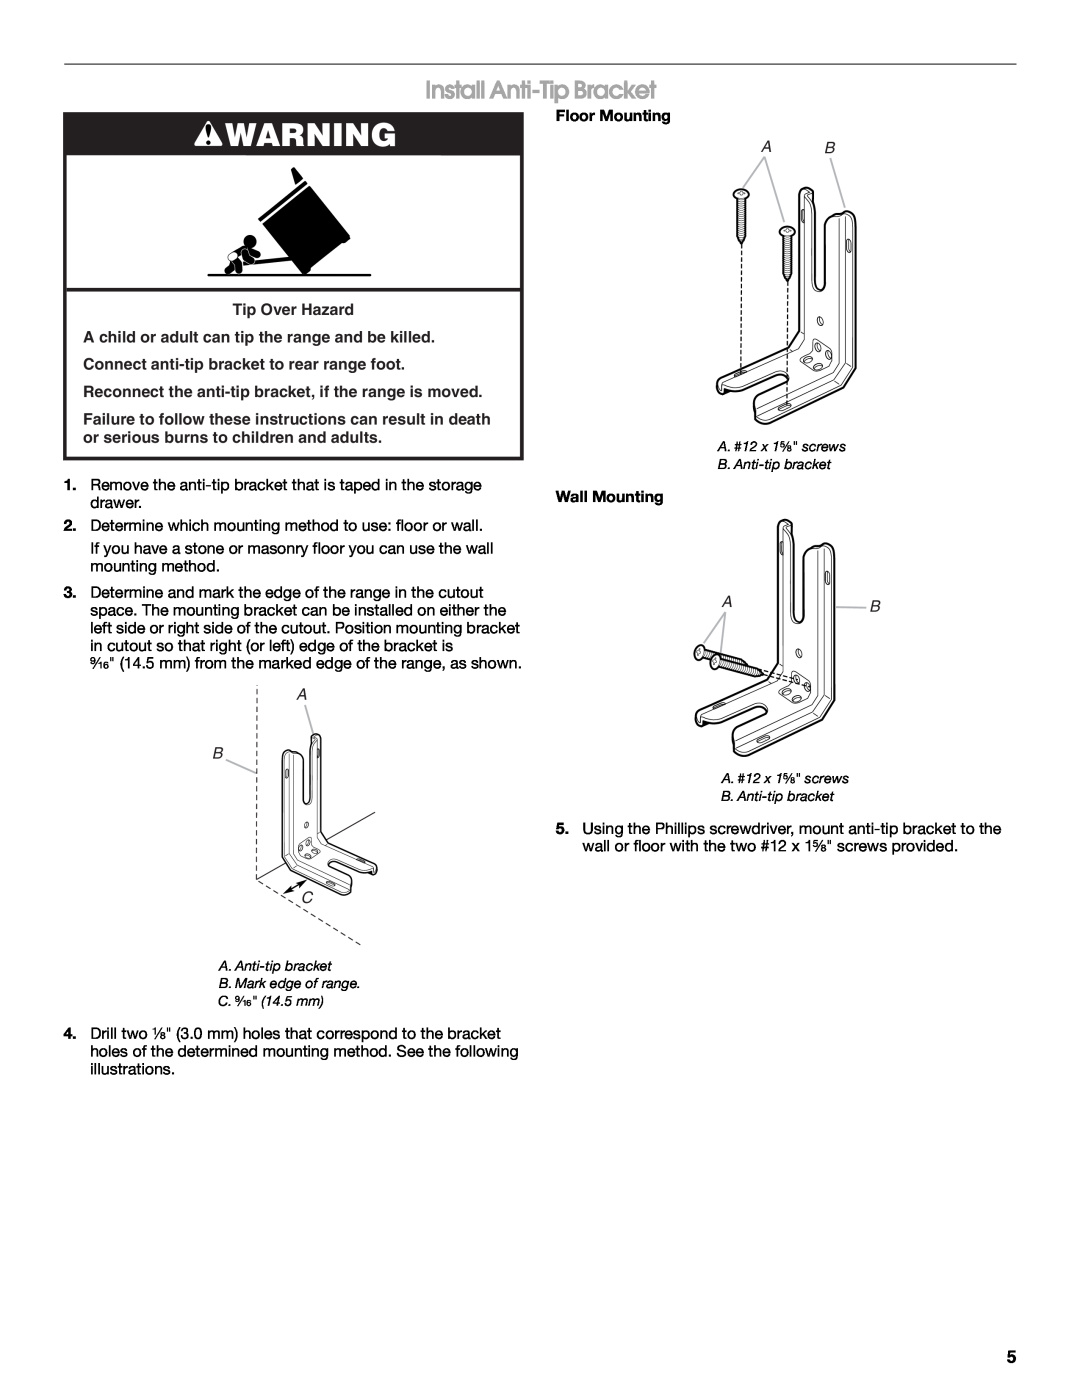 Whirlpool W10258095A Install Anti-Tip Bracket, Tip Over Hazard A child or adult can tip the range and be killed, A B C 